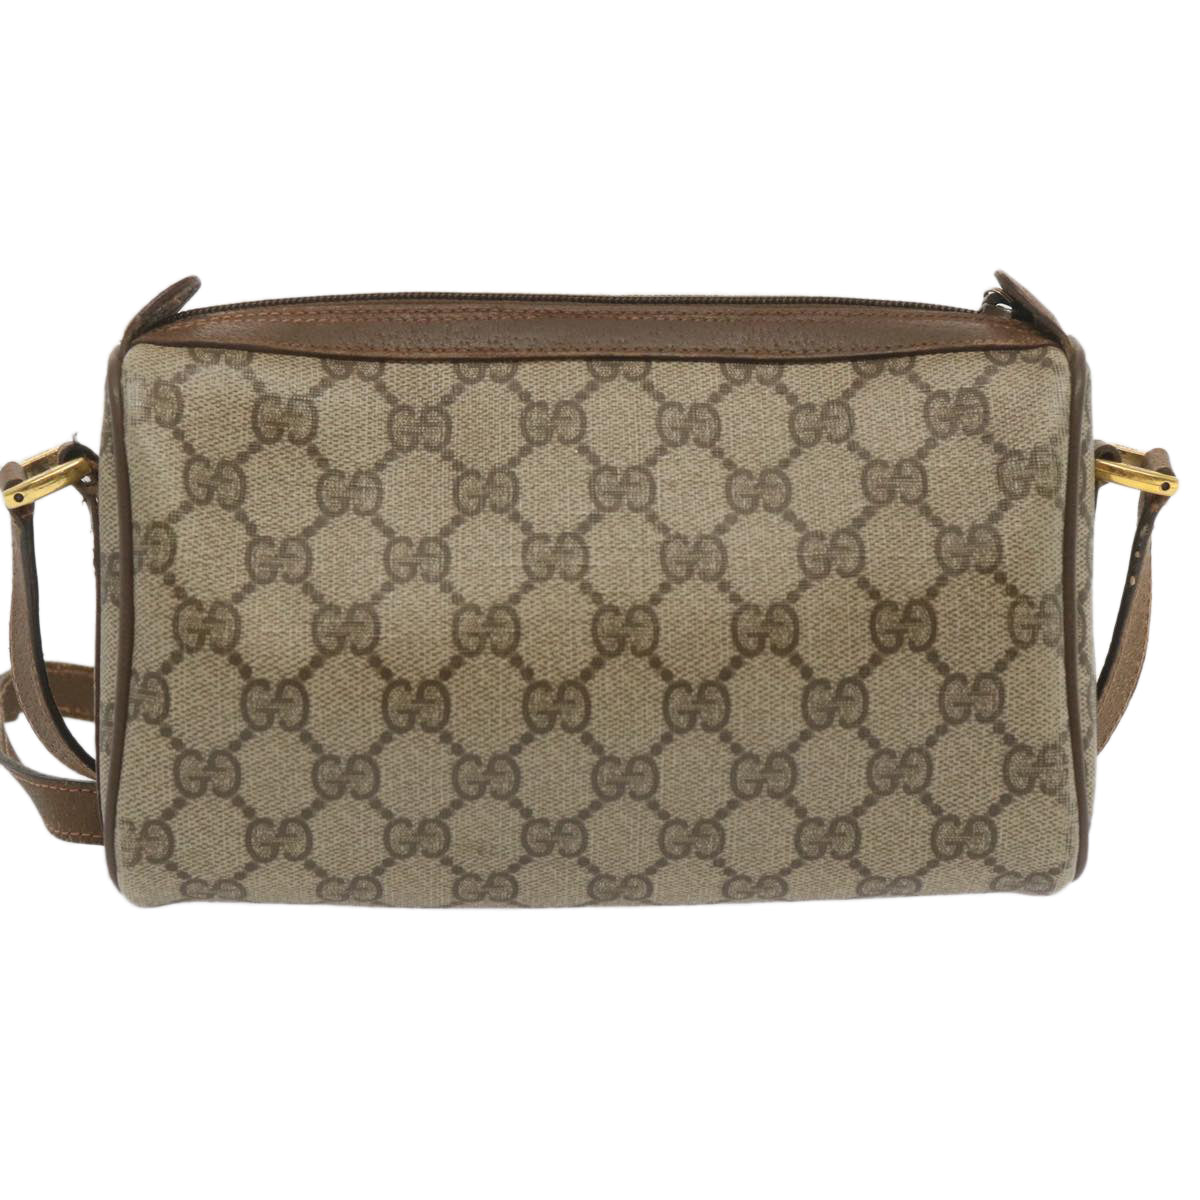 GUCCI GG Canvas Web Sherry Line Shoulder Bag Beige Green 89 02 018 Auth bs12742 - 0